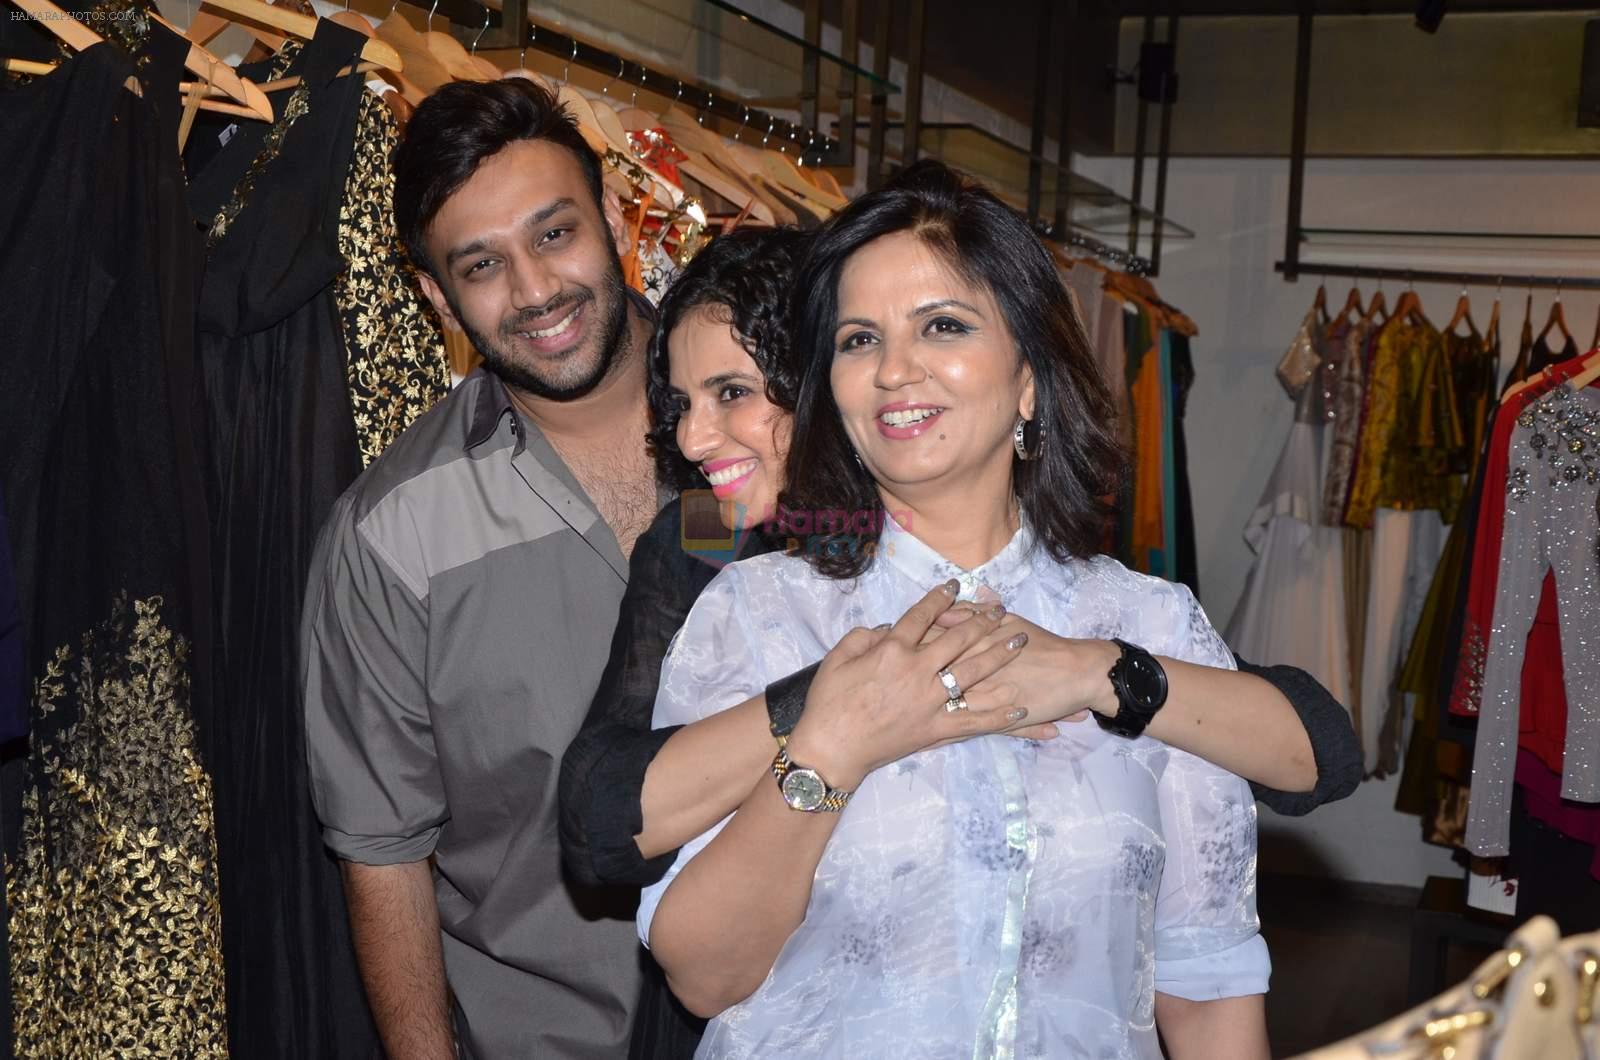 Neeta Lulla at Atosa launches new collection on 2nd Dec 2015